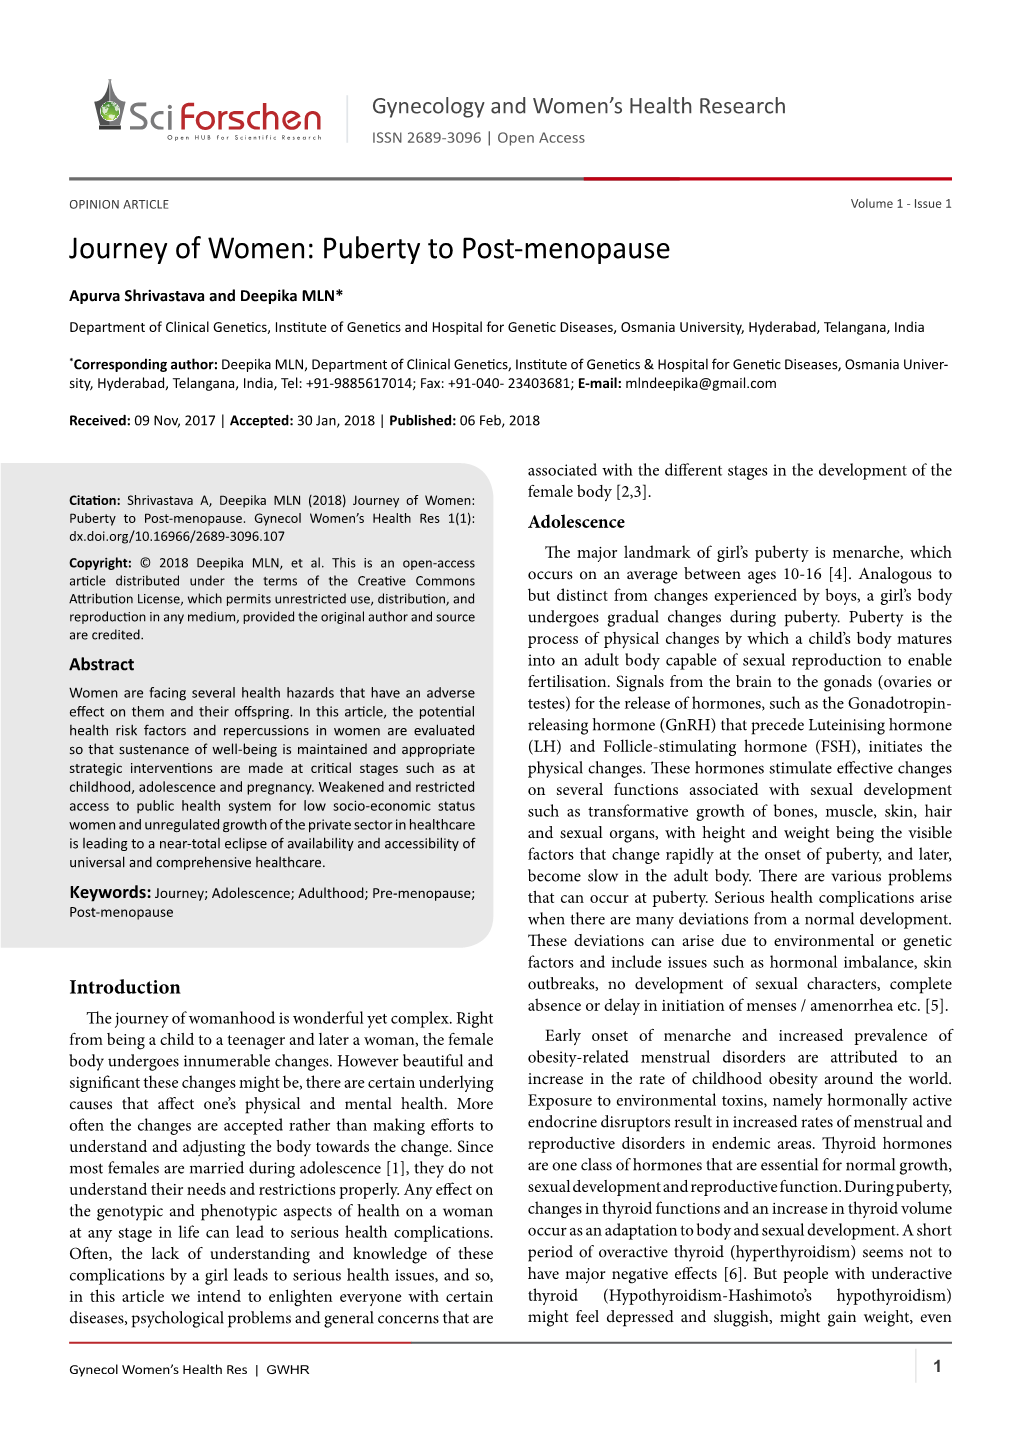 Journey of Women: Puberty to Post-Menopause